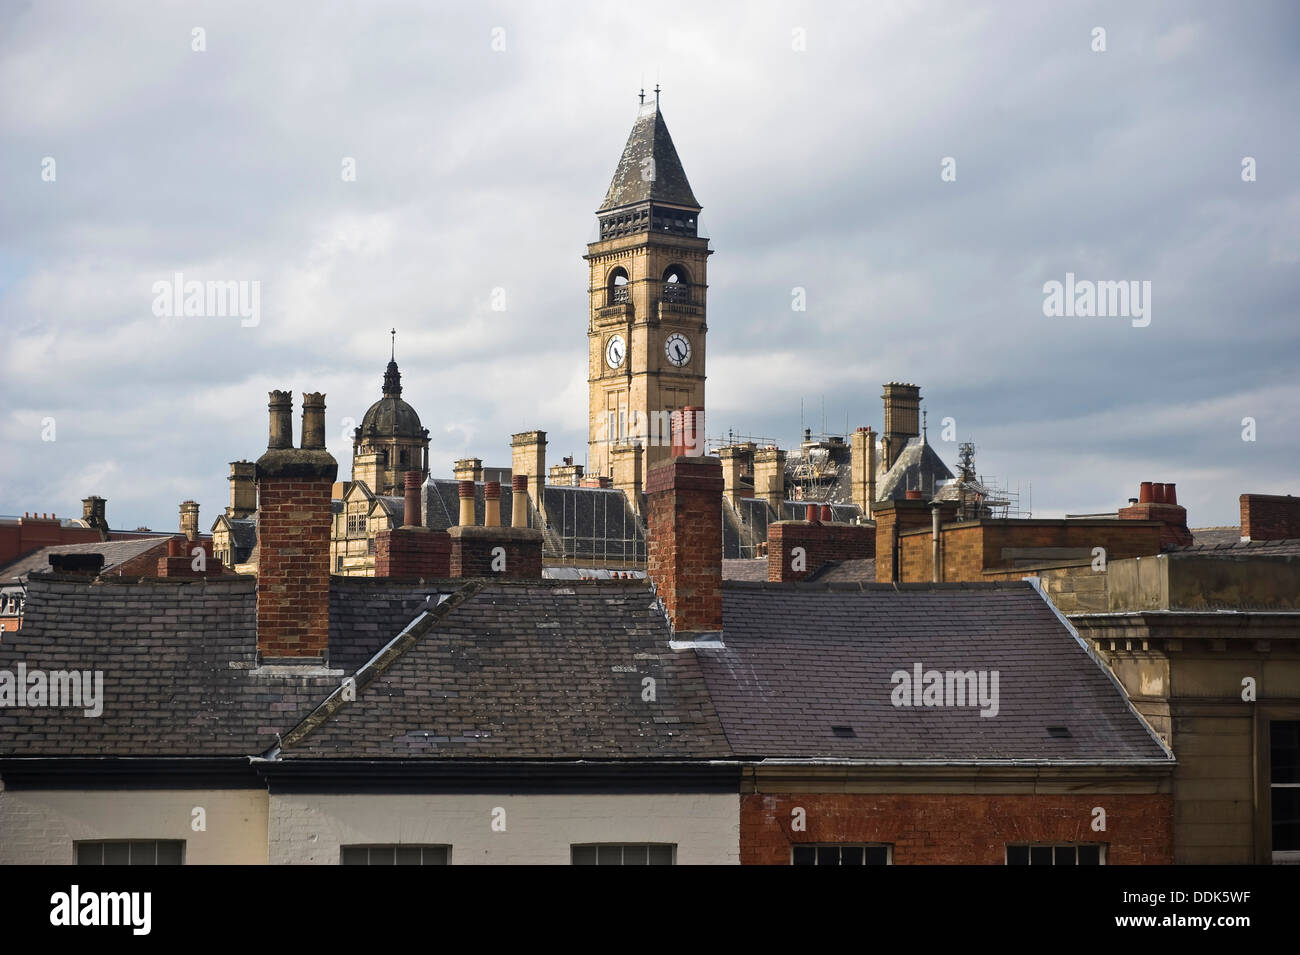 Wakefield Town Hall clock tower, South Yorkshire, Regno Unito Foto Stock